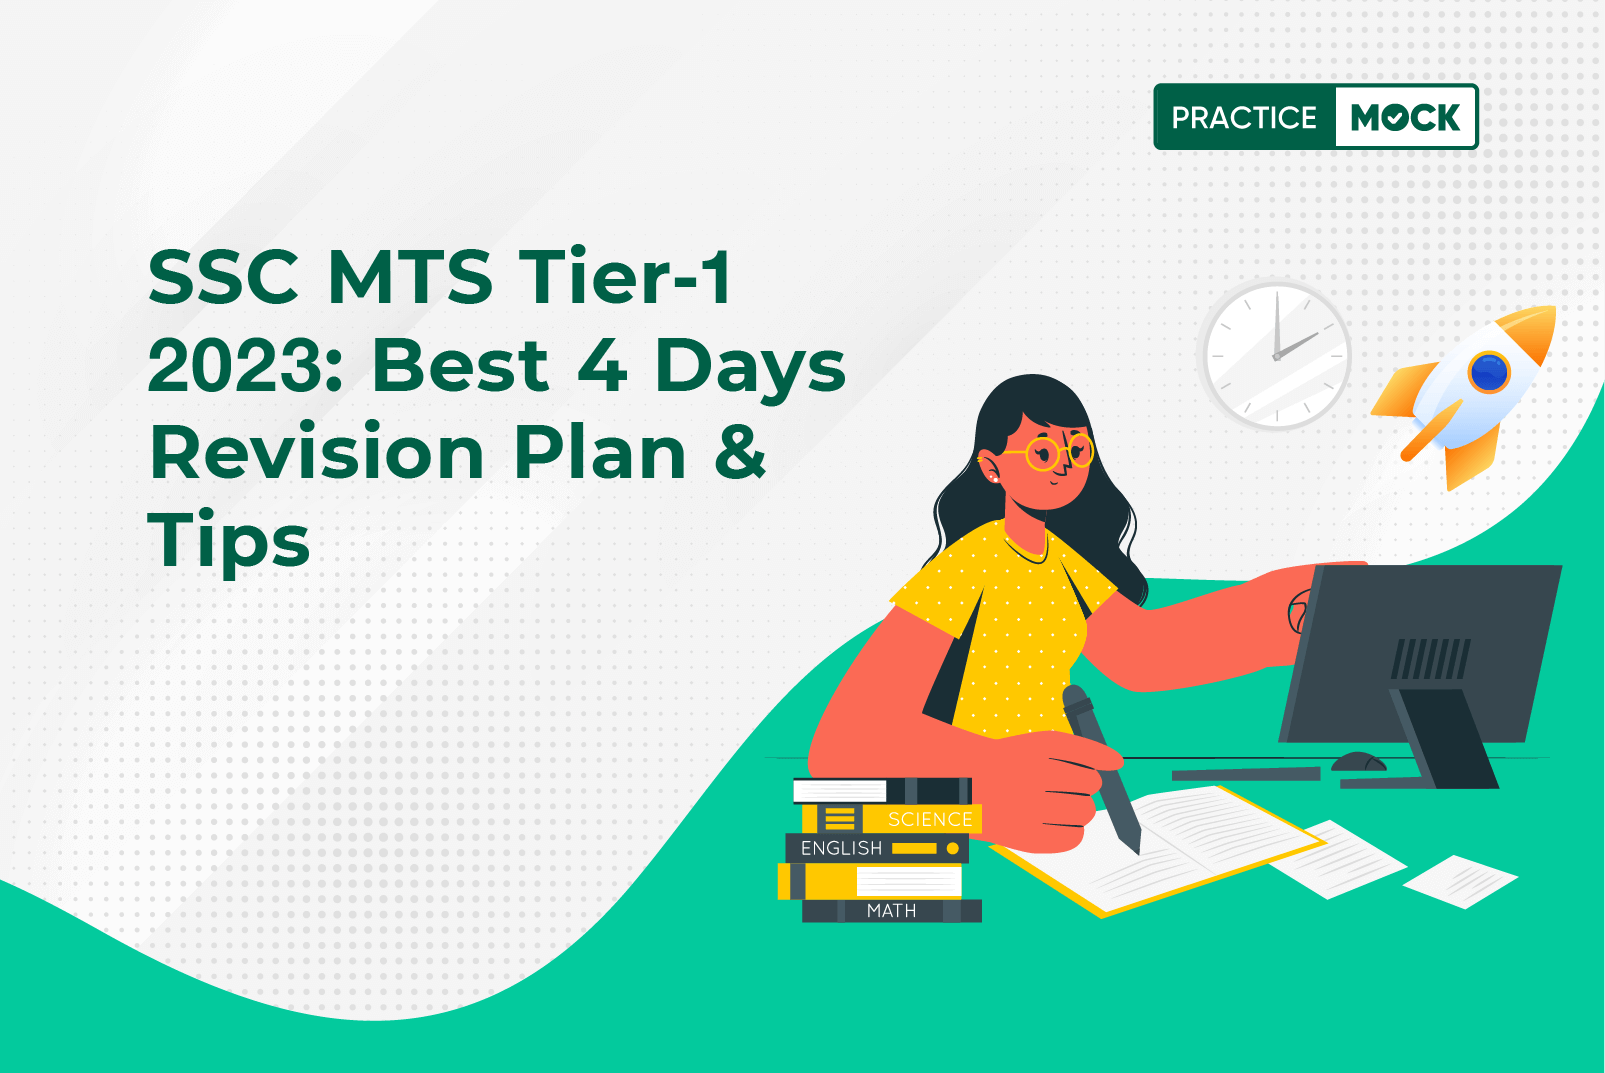 SSC MTS Tier 1 2023-Best 4 Days Revision Plan & Tips